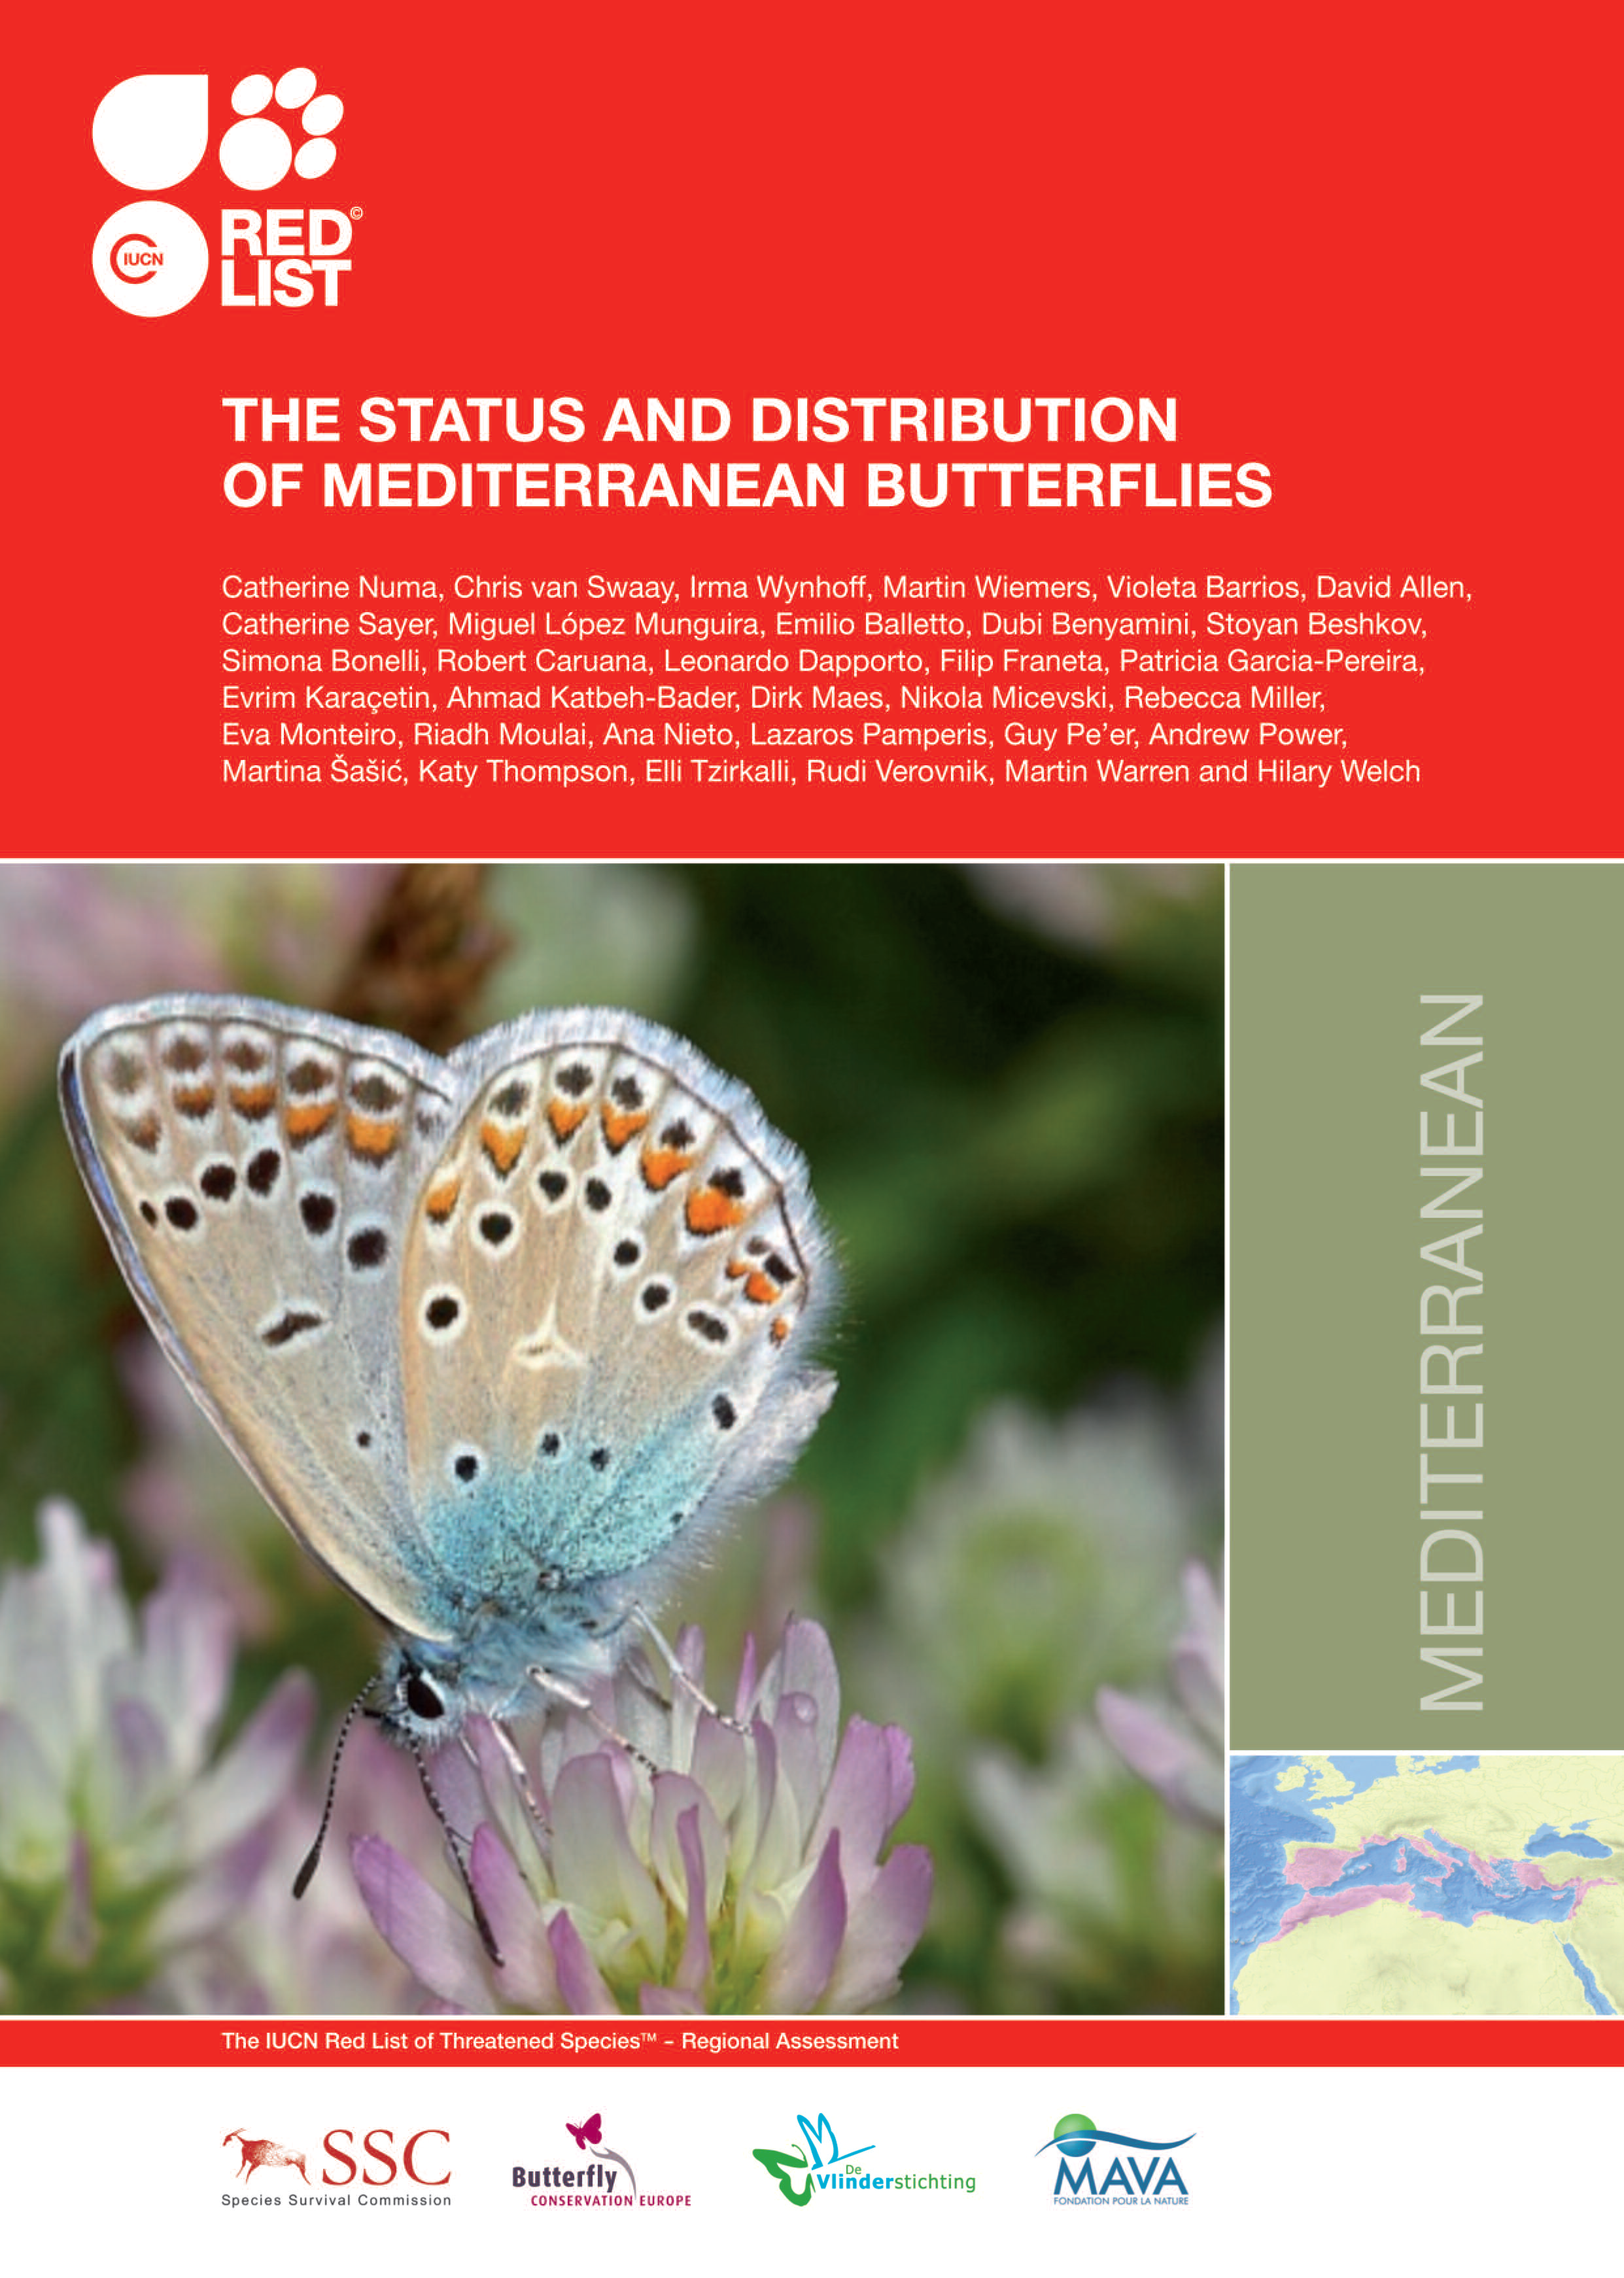 The status and distribution of Mediterranean butterflies